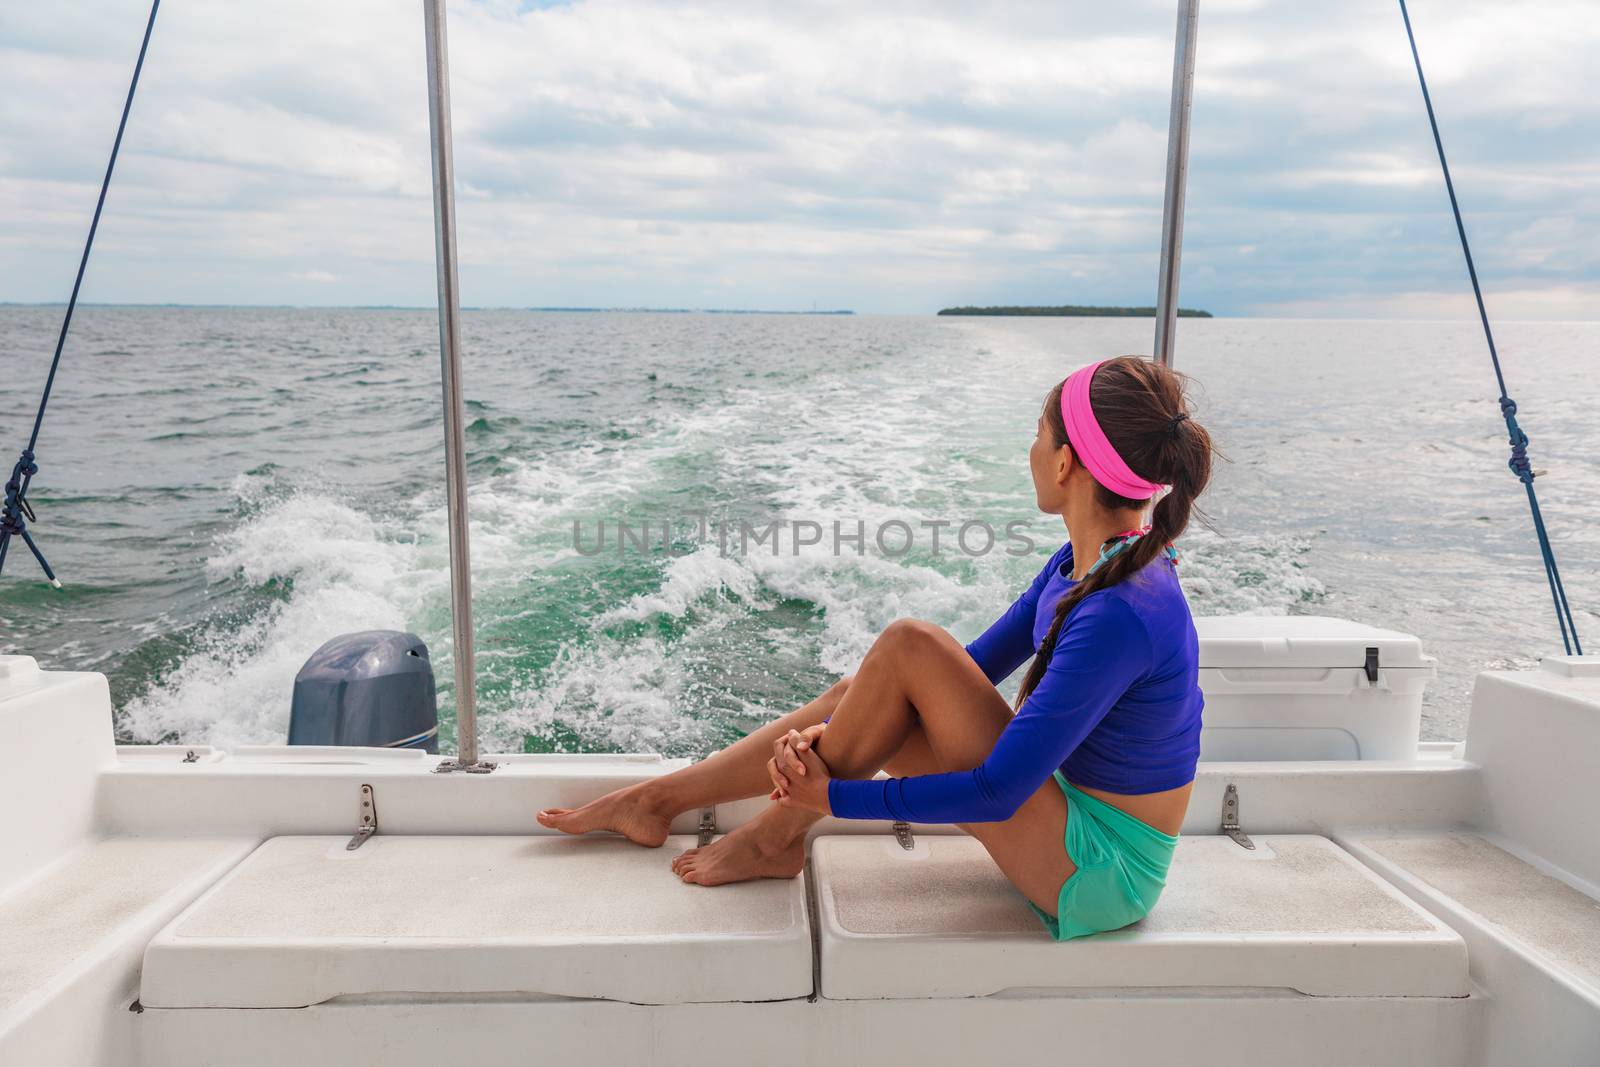 Travel boat excursion tour woman tourist relaxing on deck of motorboat catamaran summer vacation.